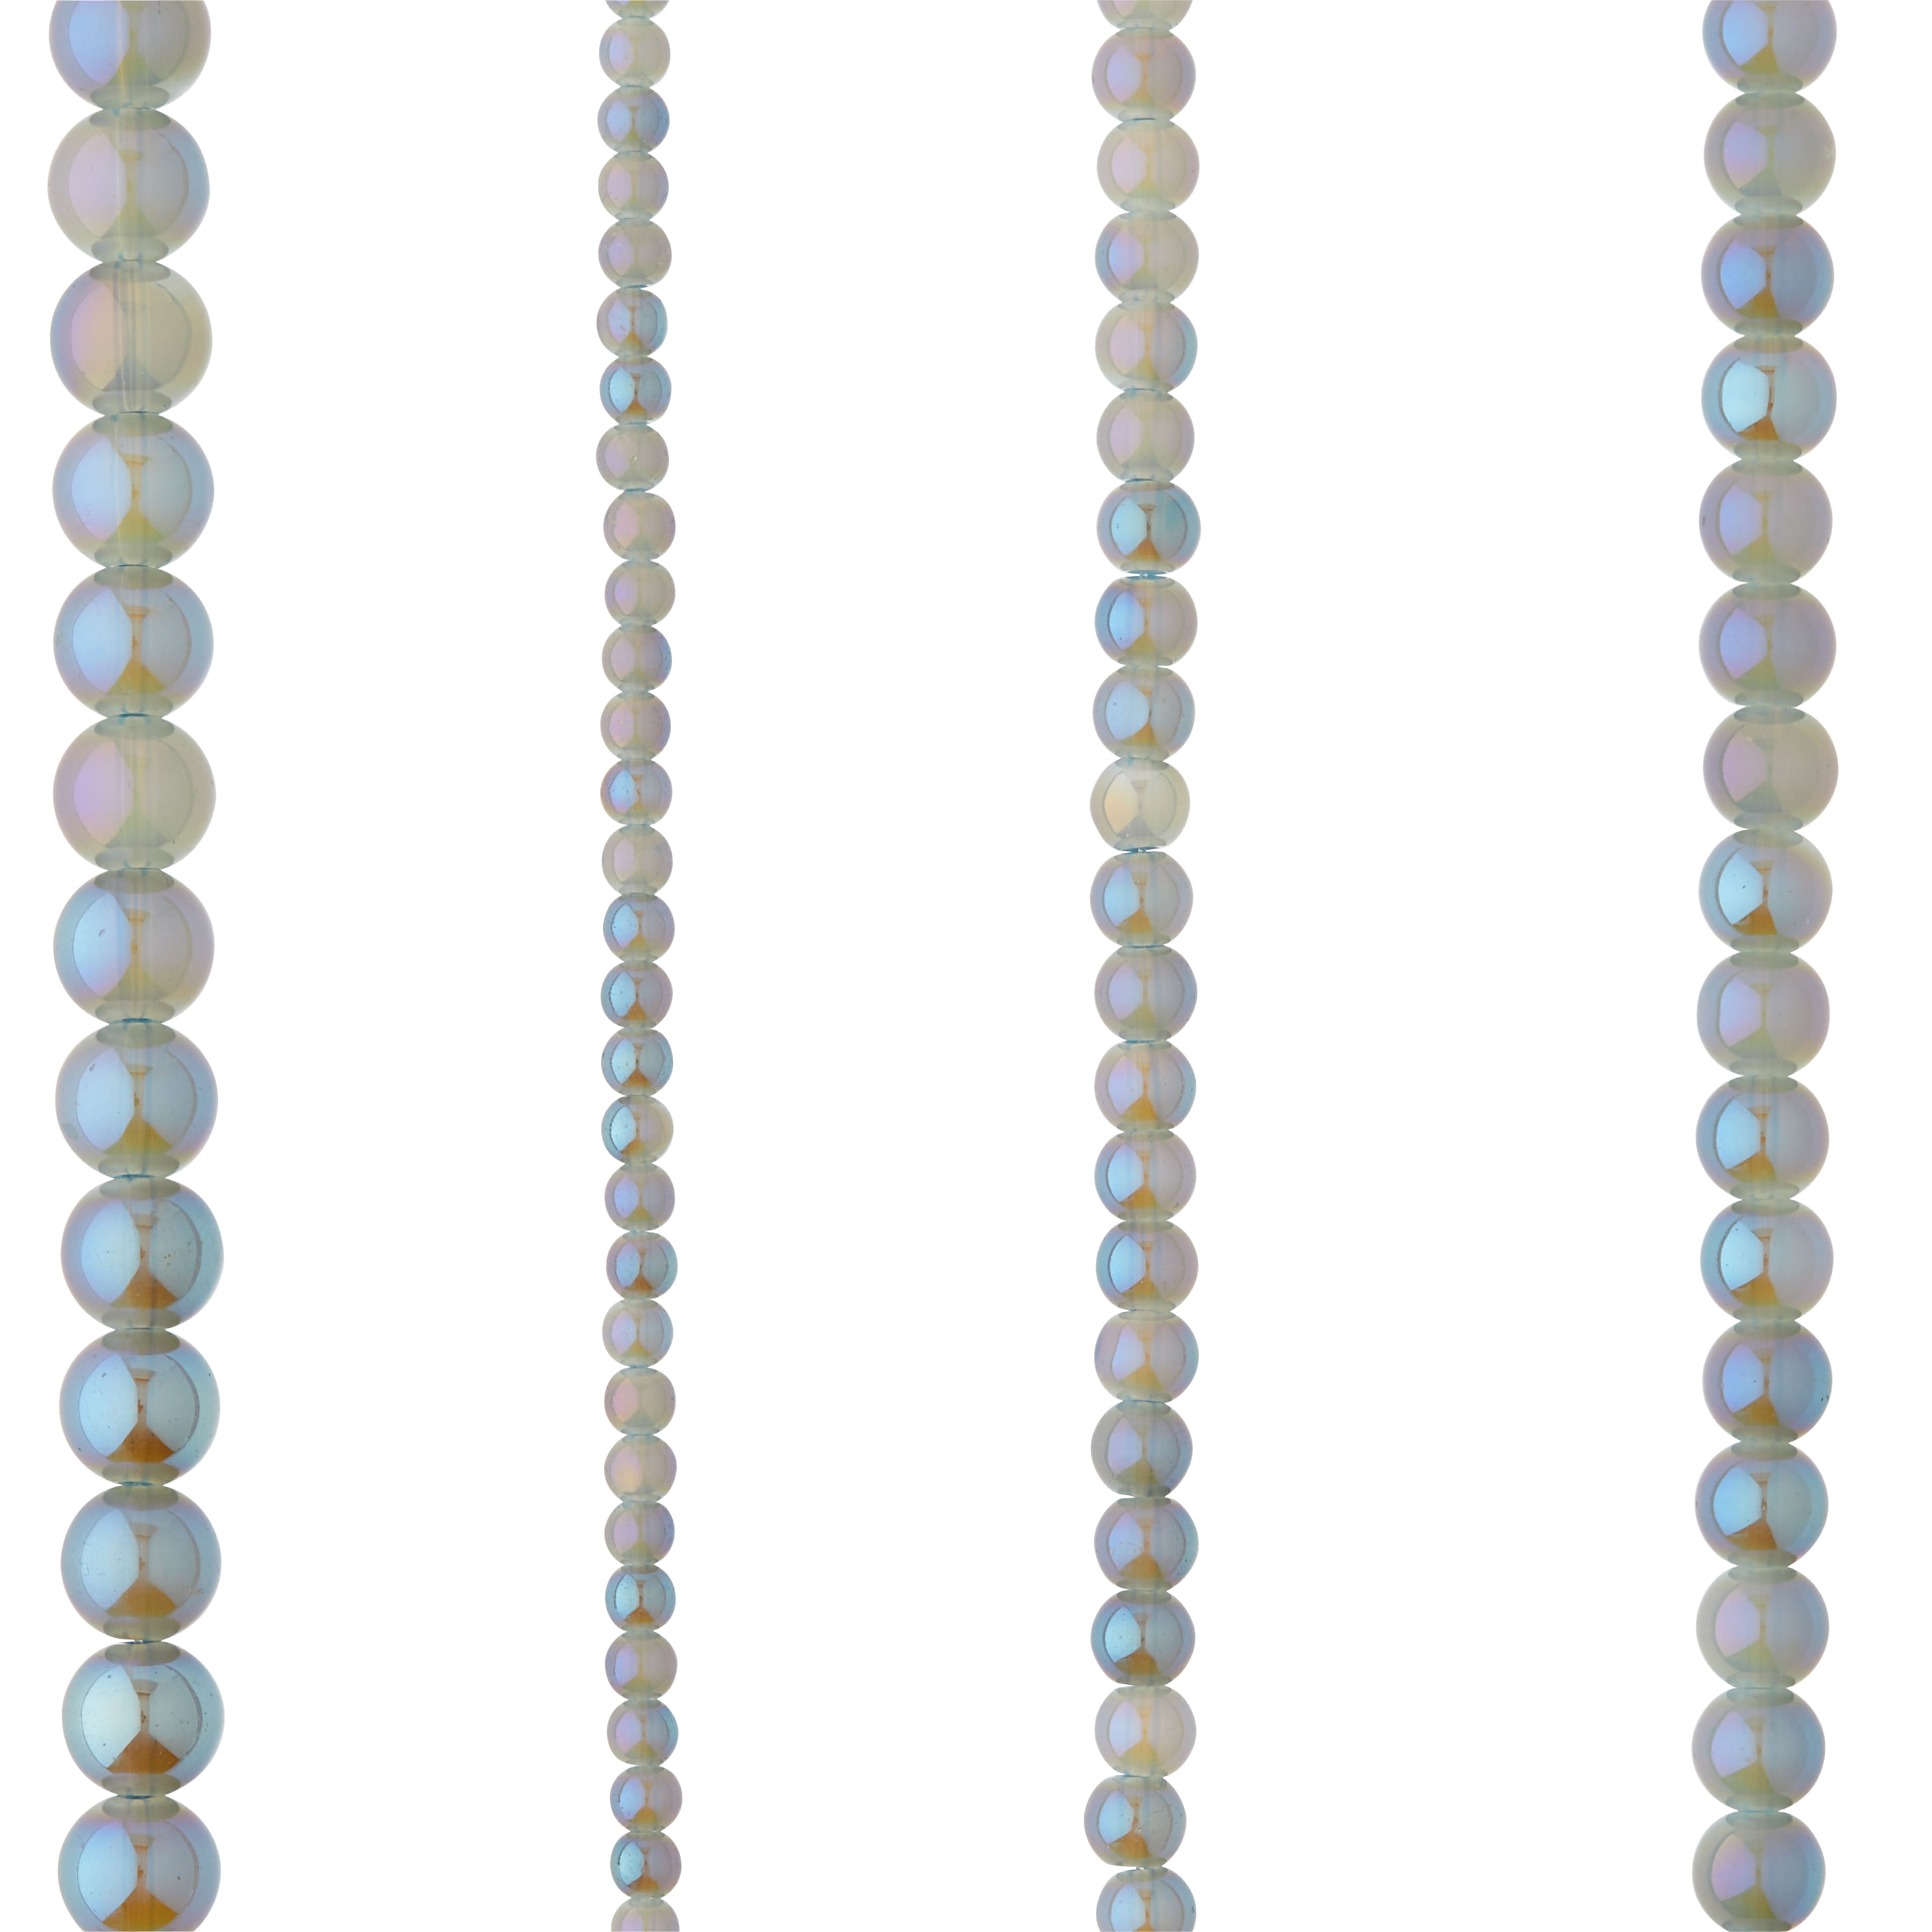 Clear Aurora Borealis Glass Butterfly Beads by Bead Landing™, 15mm